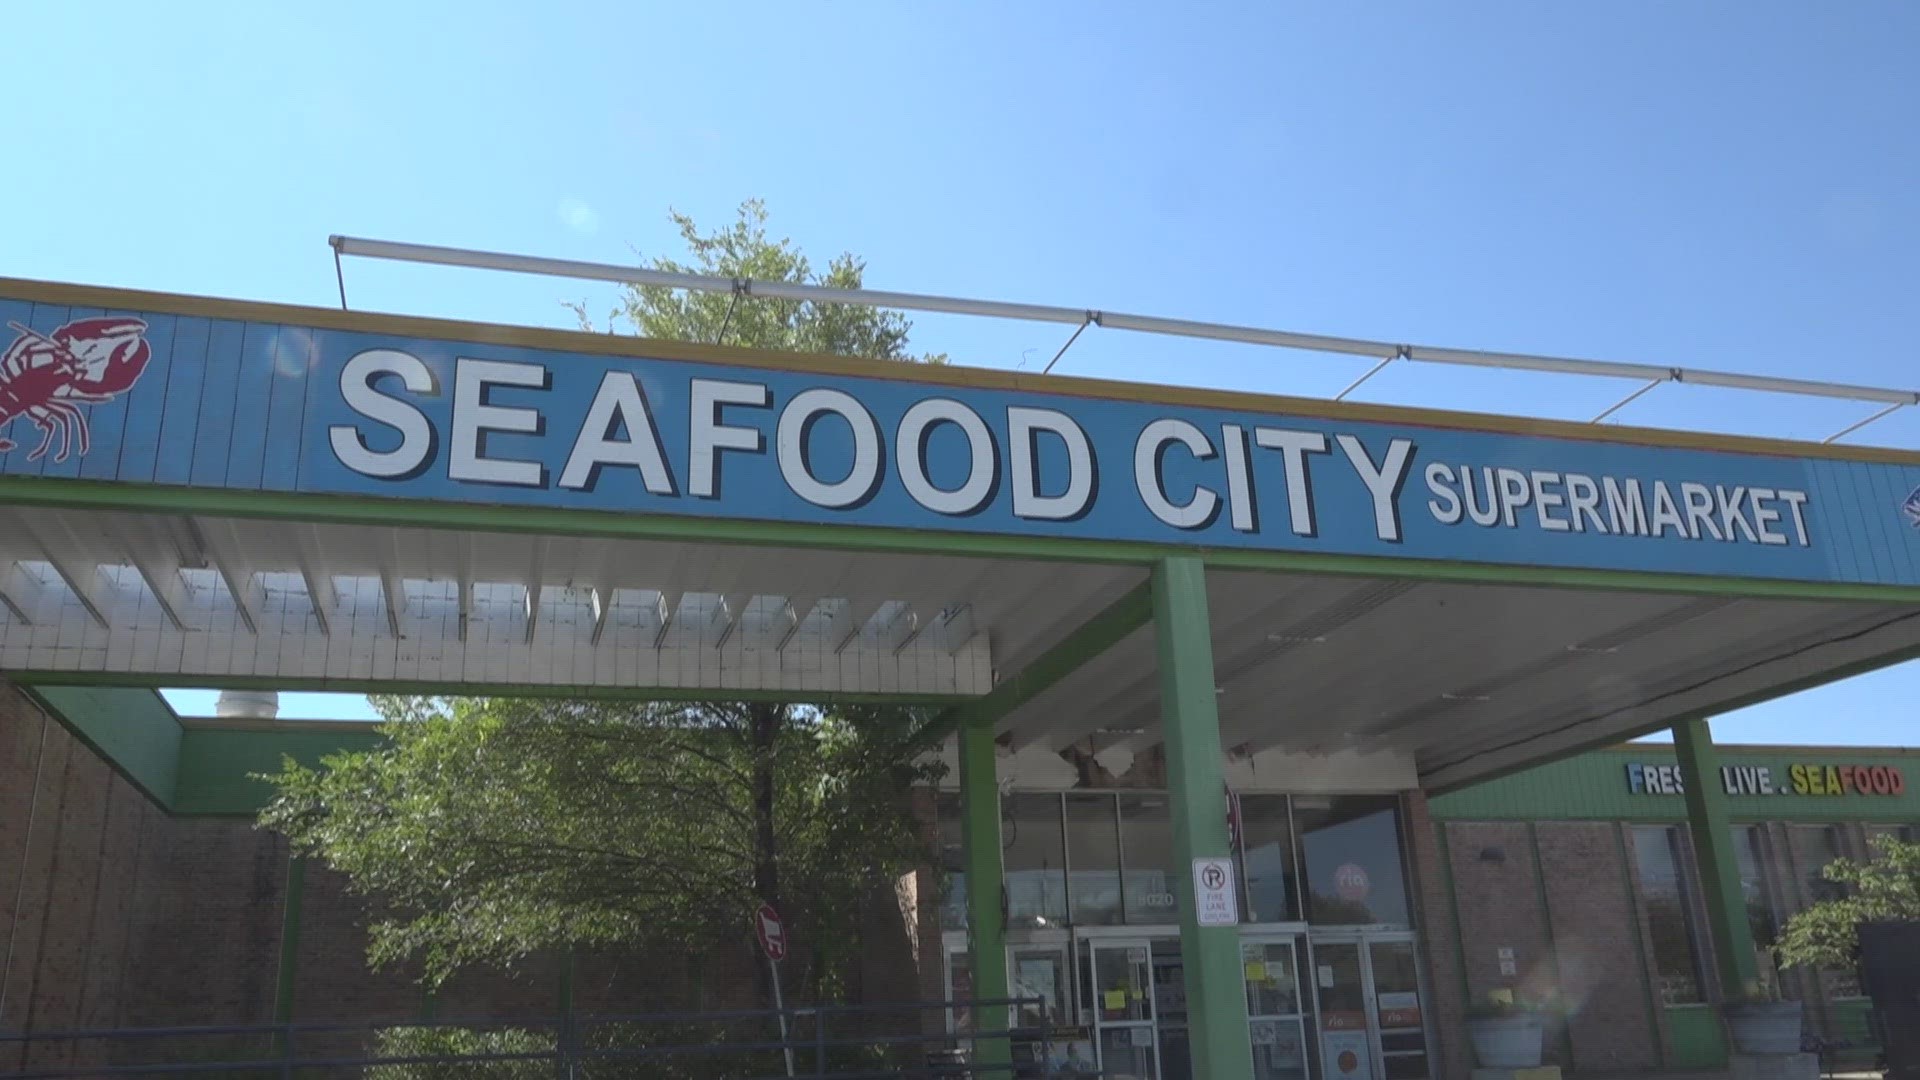 There's a big stink over unpaid rent in University City at the former Seafood City supermarket. The property manager and business owner are headed for trial.